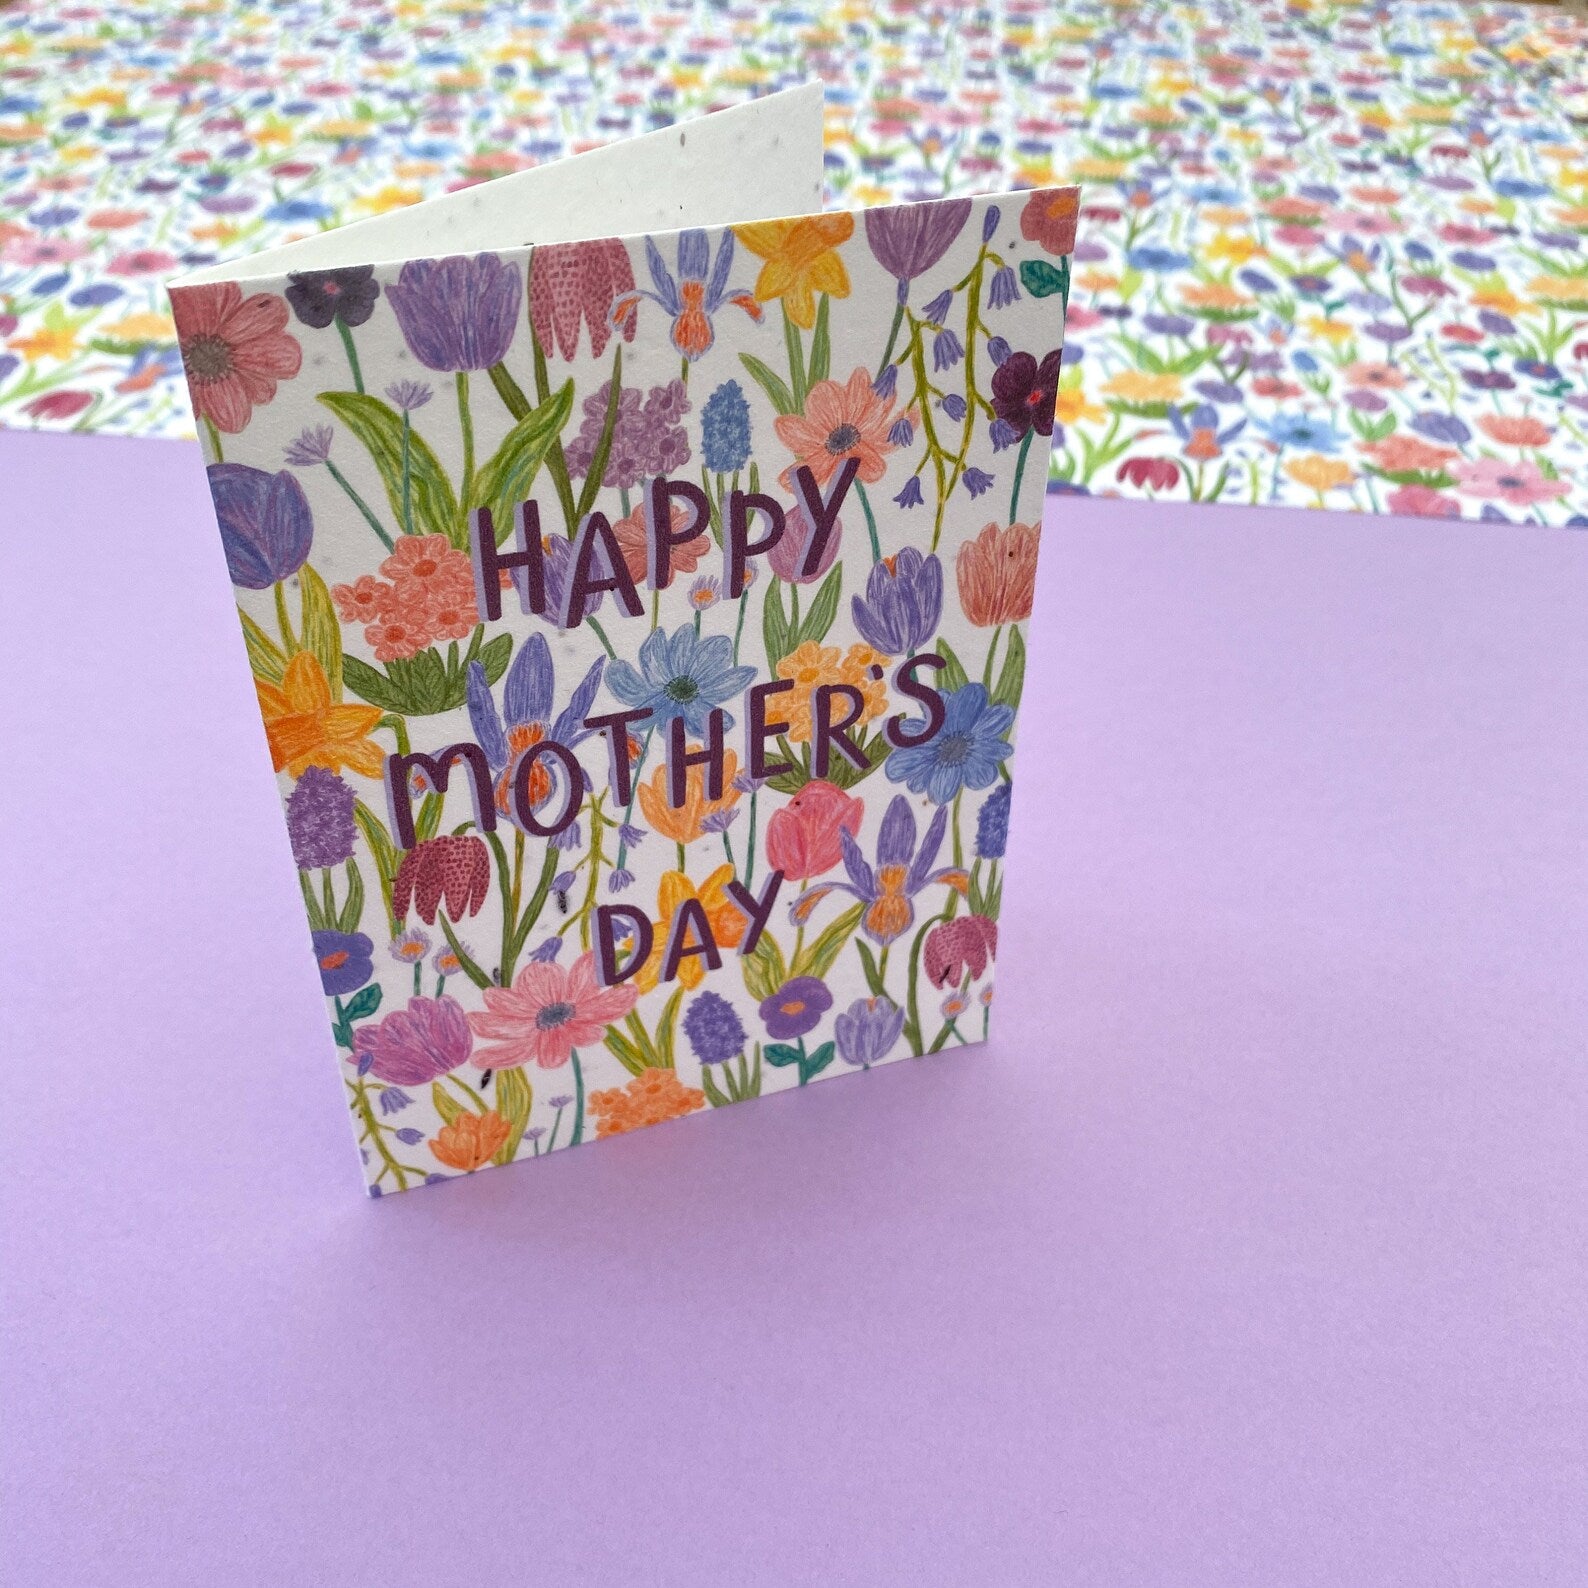 Mothers Day Cards with spring flower illustration covering card and printed on seed embedded paper.